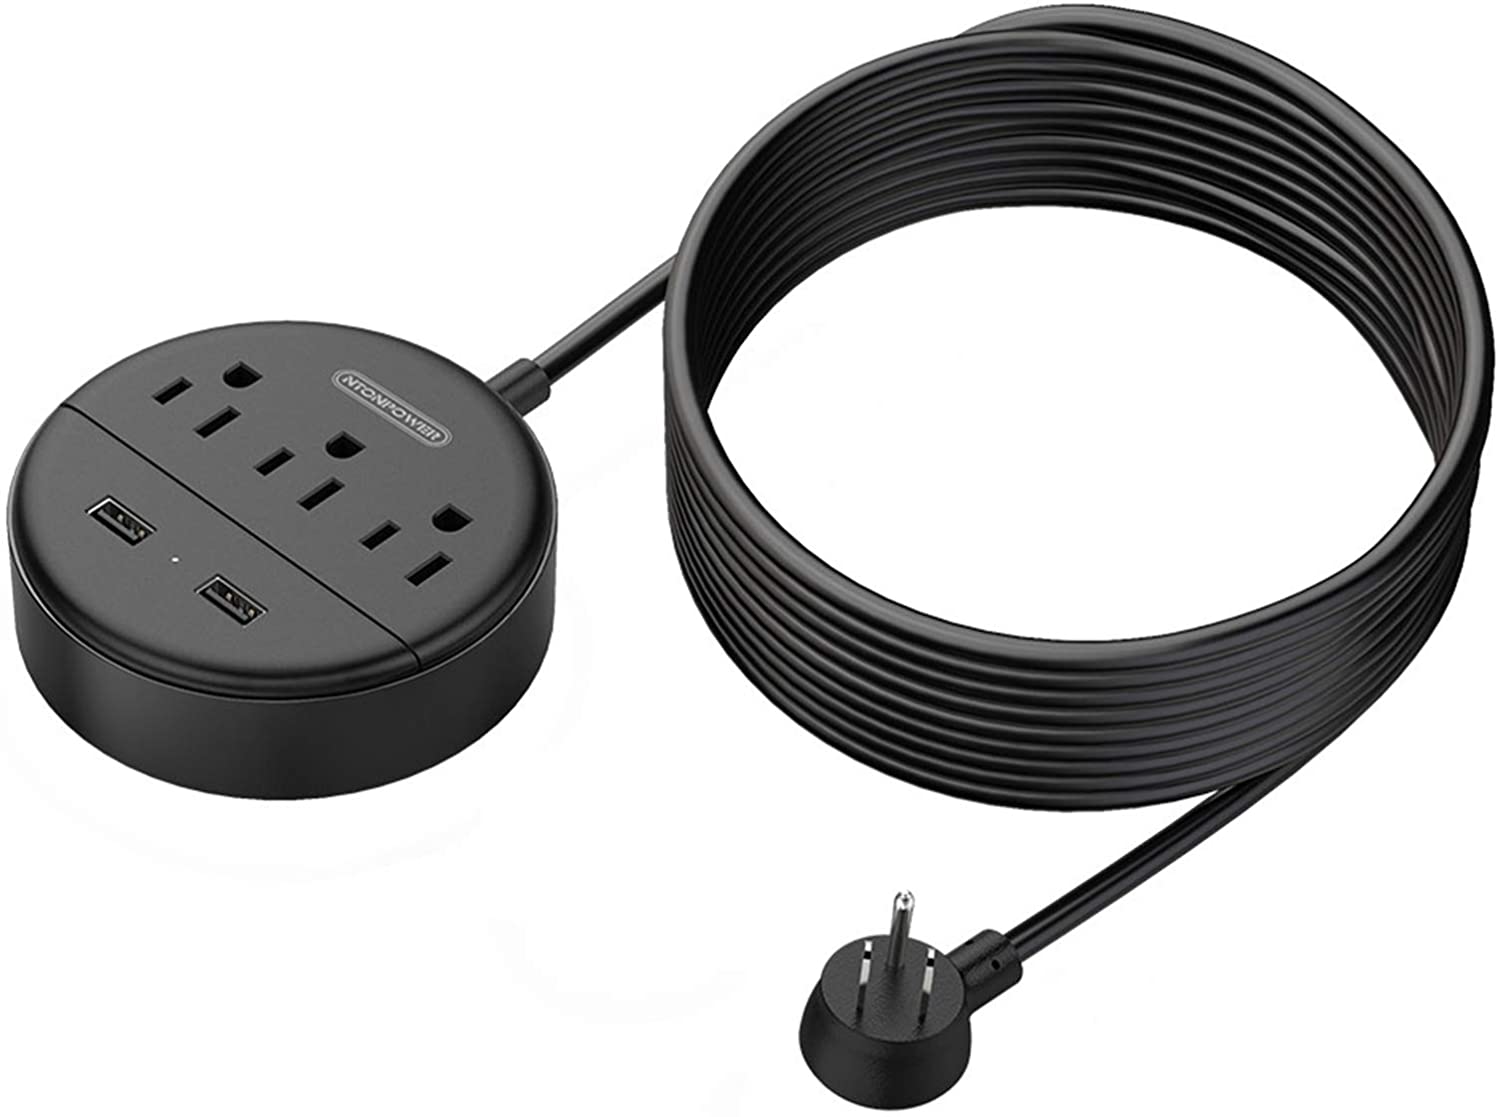 Black 15FT Cord Under Desk Power Strip, Adhesive Wall Mount Power